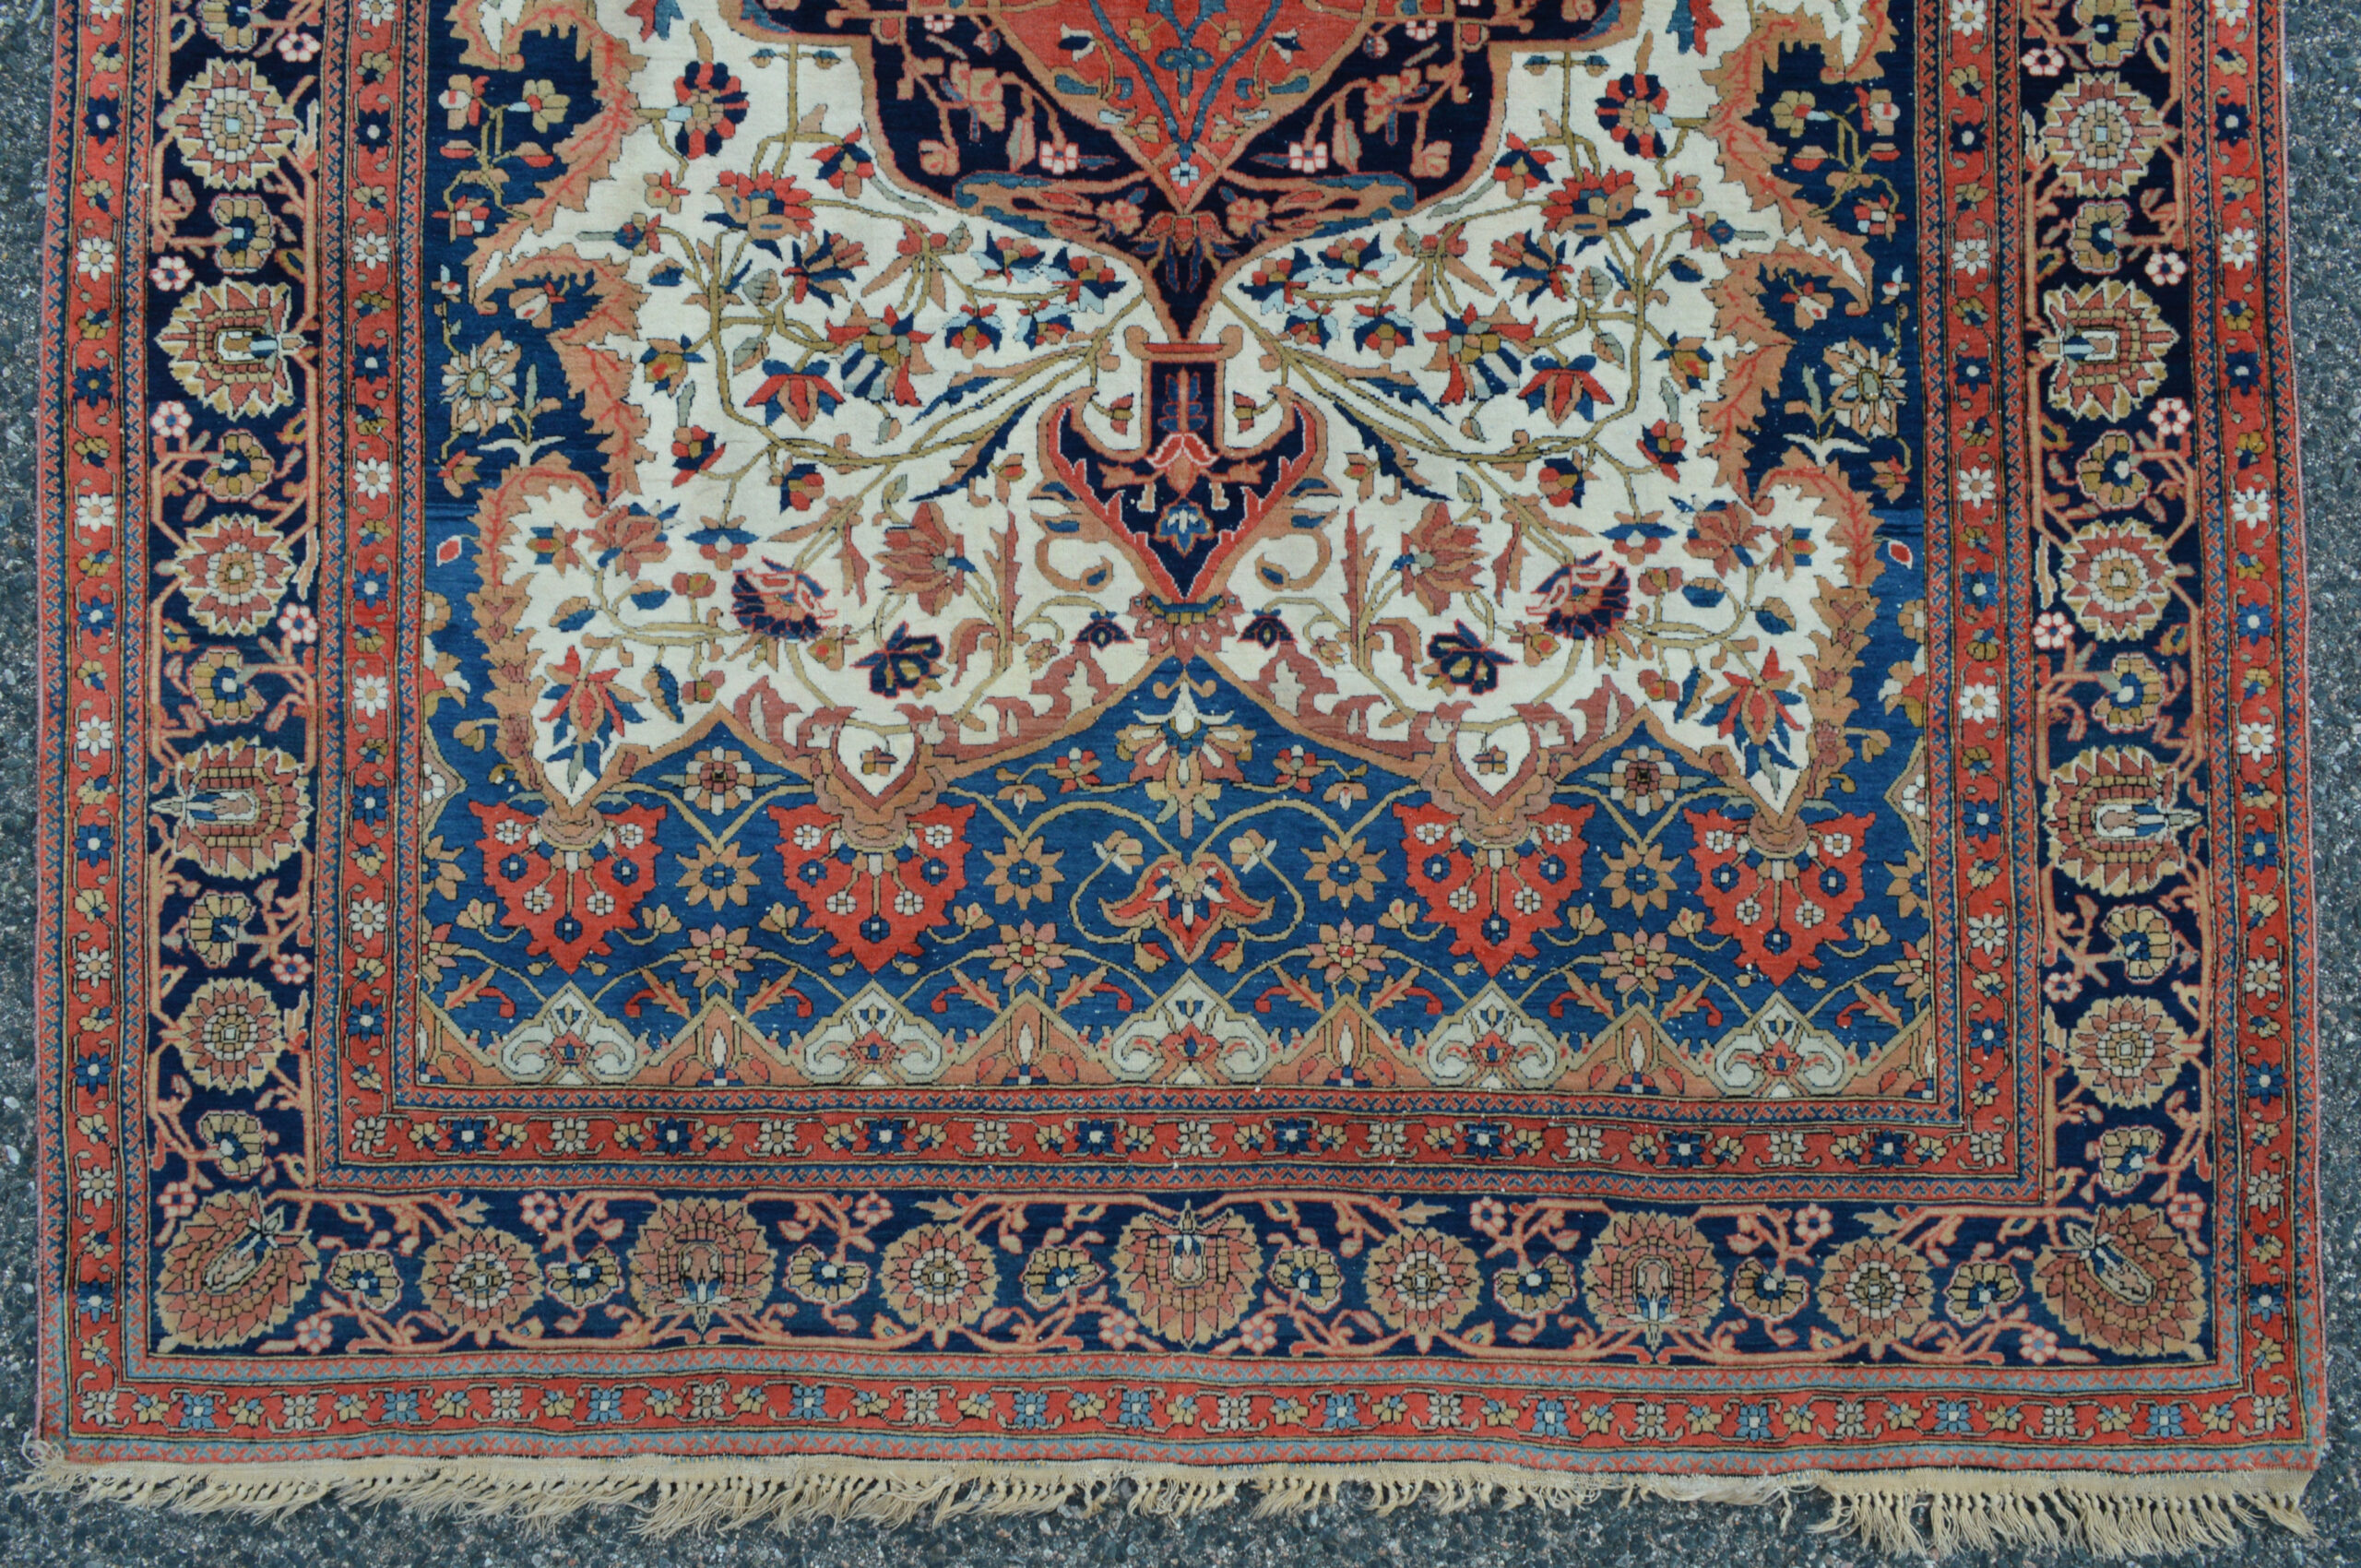 Field and border detail from a 19th century antique Persian Mohtasham Kashan rug with an ivory field, mid blue trim around the field and a navy blue border, central Persia, circa 1880. Douglas Stock Gallery, antique Persian carpets Boston,MA area, antique rugs New York City by appointment